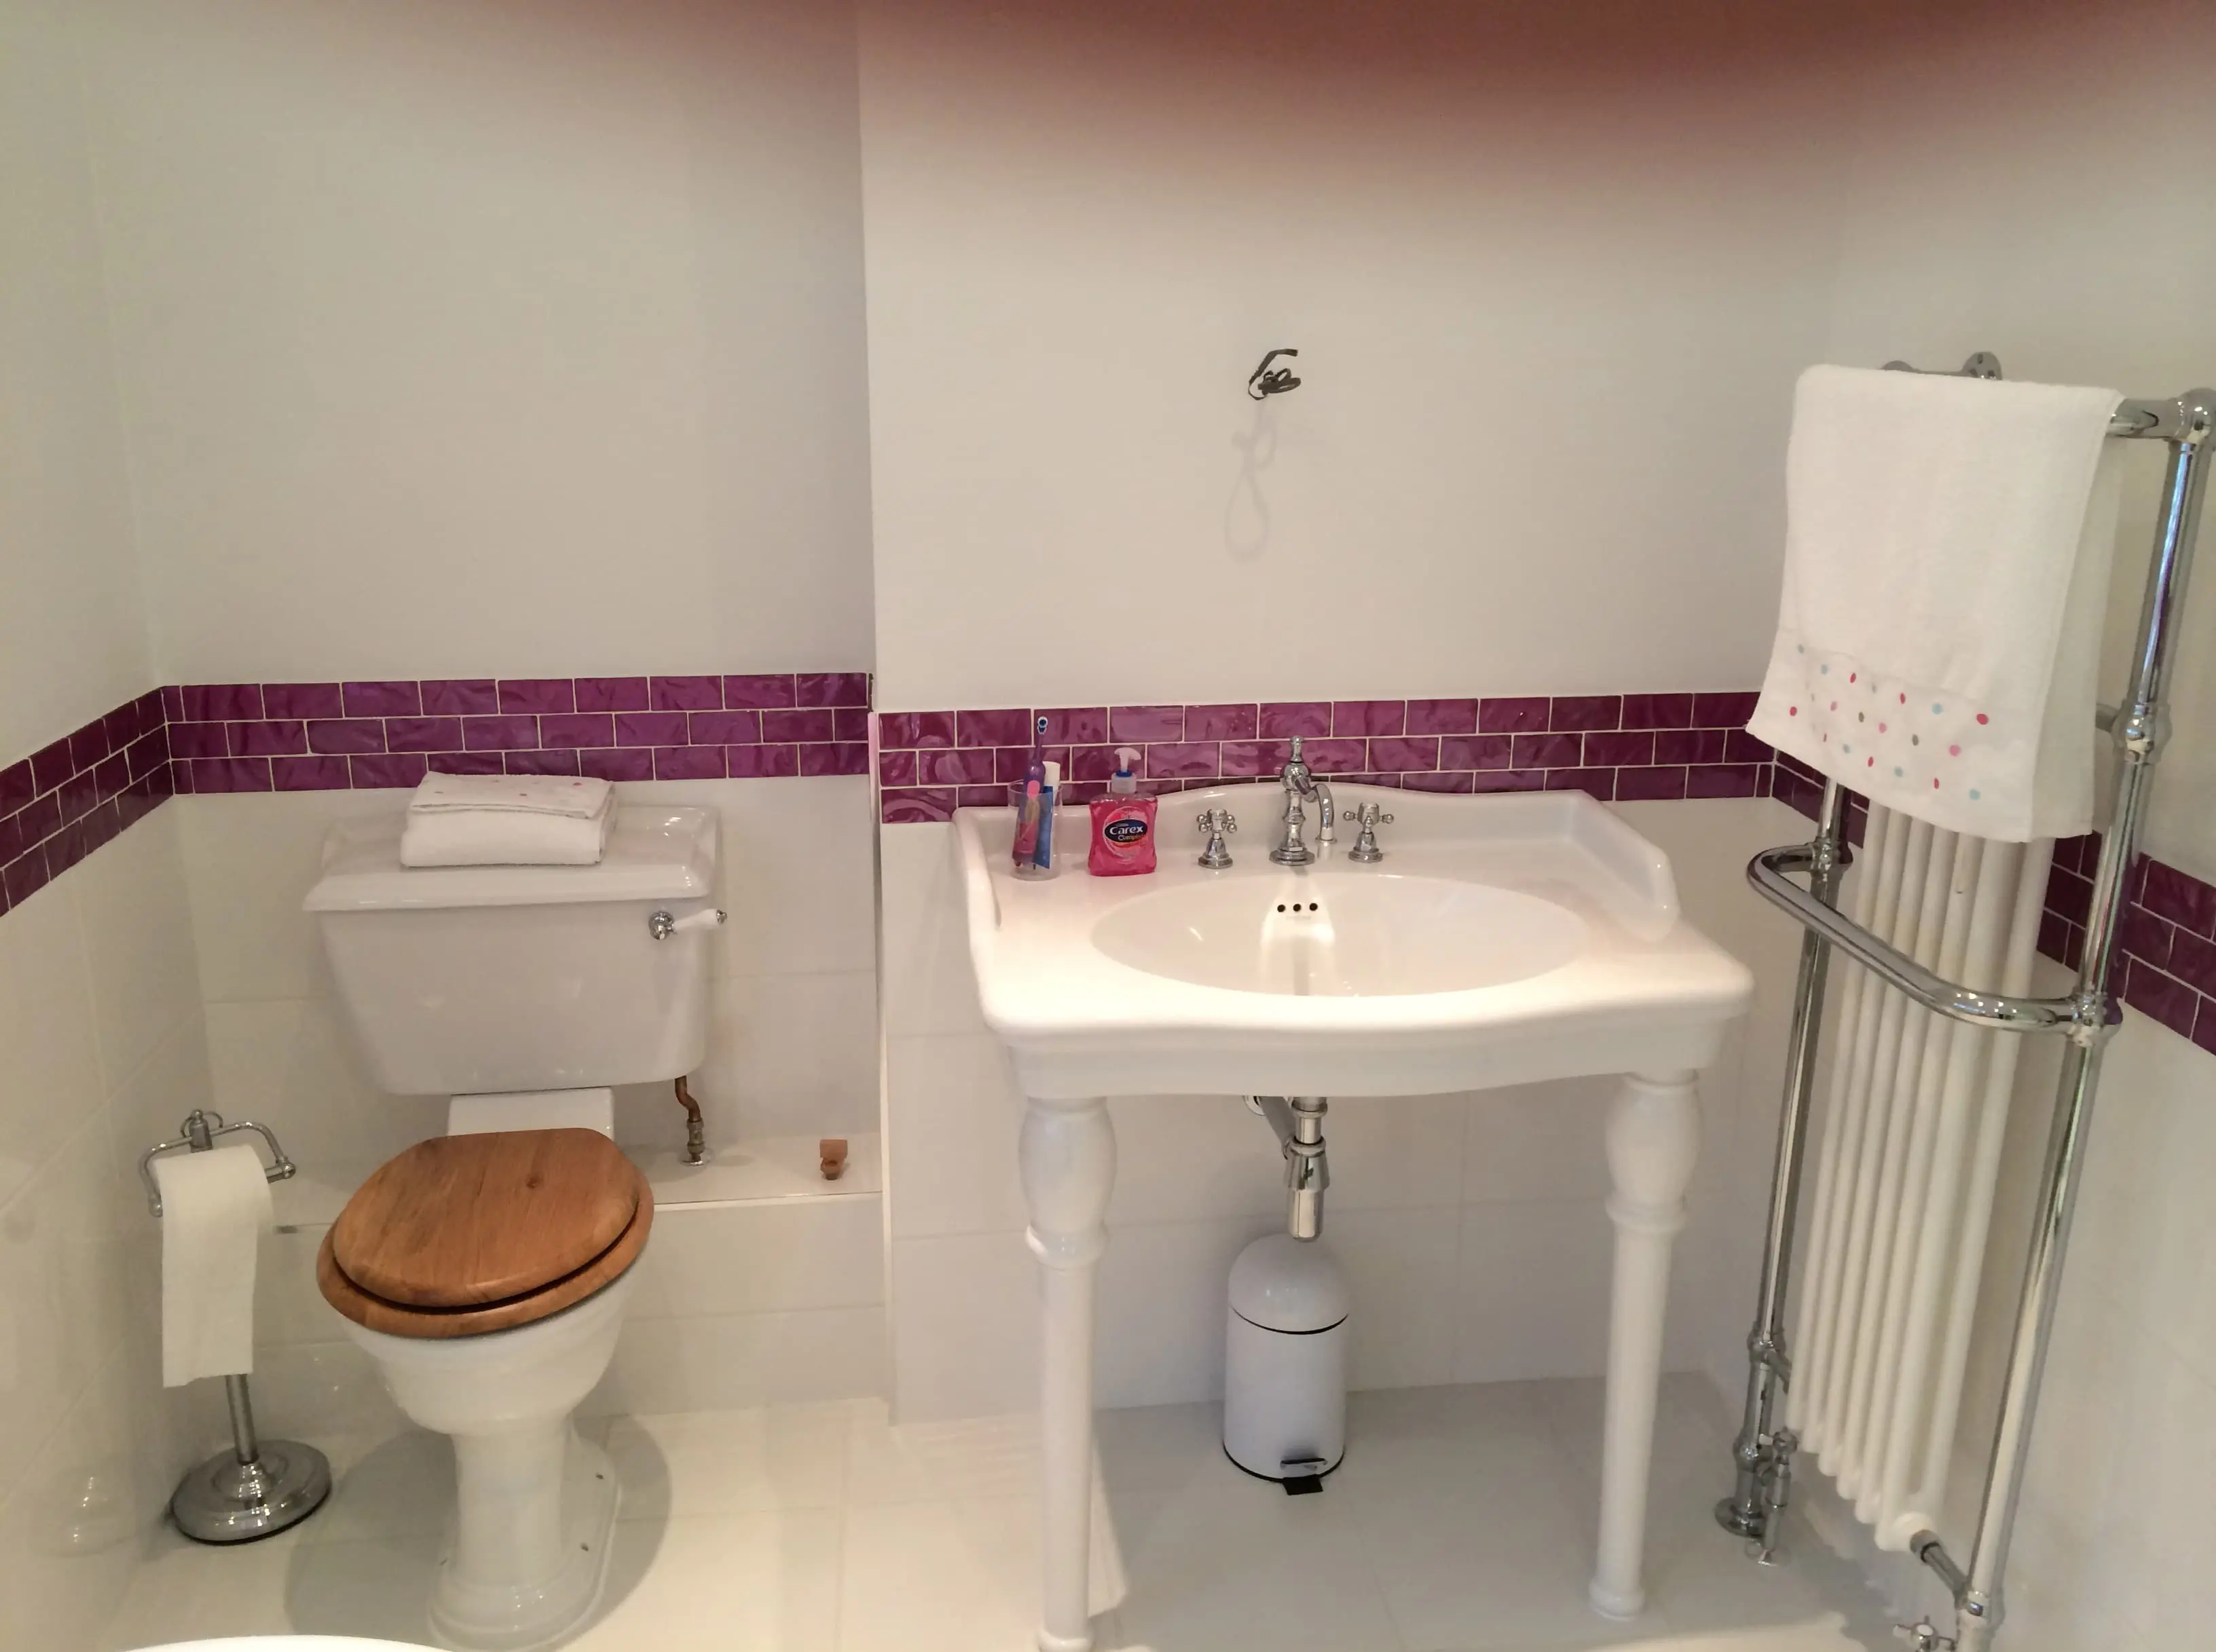 With&nbsp;over 42 years of experience, I can supply and fit bathroom fittings at competitive prices in the following areas:ReadingShinfieldCalcotWokinghamBracknellWoodleyAnd many areas more in and around&nbsp;Lower Earley!Whether you want me to install a&nbsp;new wet room&nbsp;or just&nbsp;re-tile&nbsp;your existing bathroom, I can give your home a new look. I take great pride in providing a personalised service to&nbsp;suit your budget and taste.&nbsp;